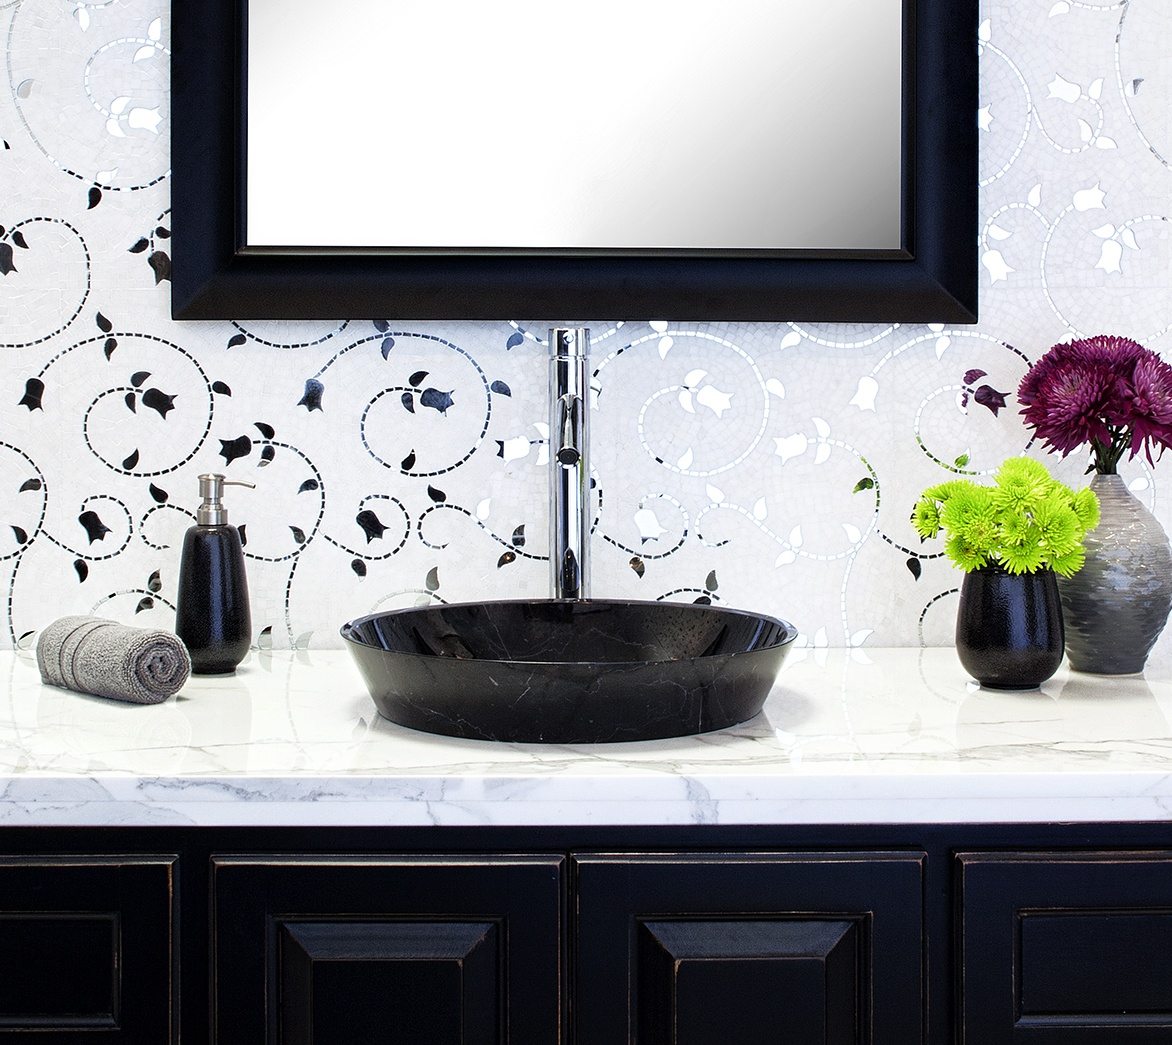 The Tulip pattern in mirror and stone creates a dazzling effect in this bath.